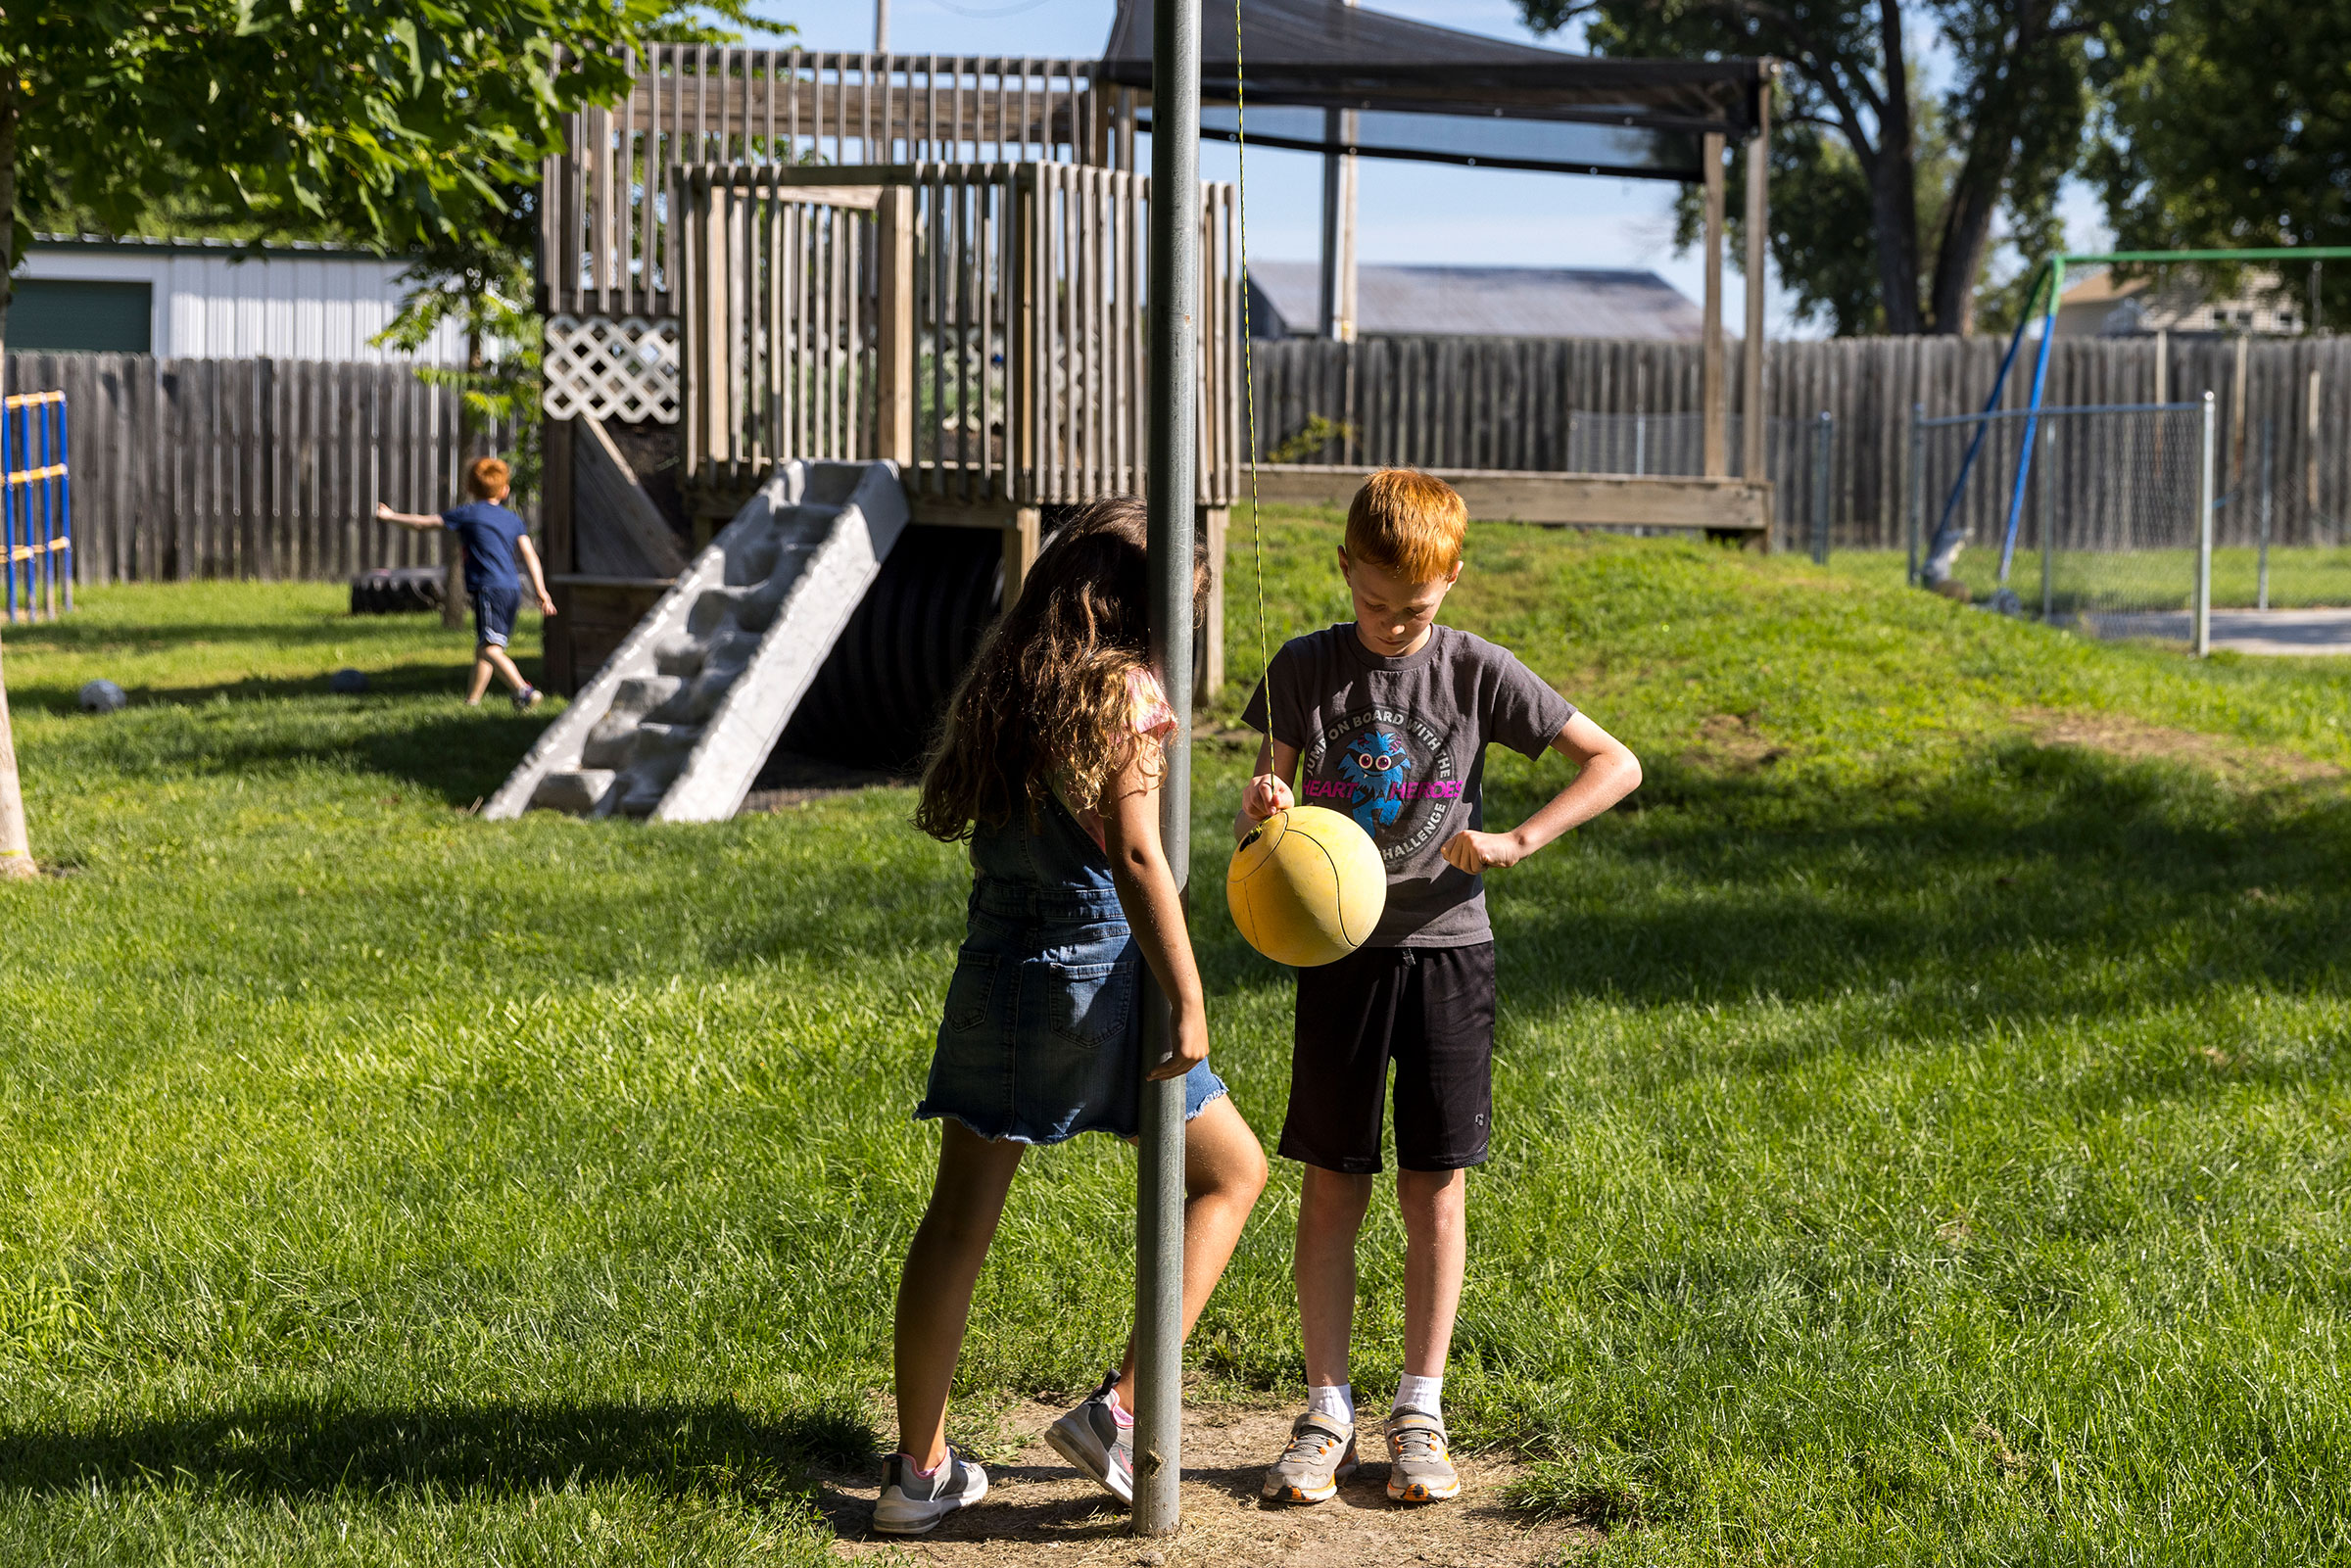 Hunter Rutkowski, age 10, and Alice Nefzger, age 8, play outside. While they will return to school soon, some parents with younger children are still trying to cobble together a new childcare arrangement. (Kathryn Gamble for TIME)